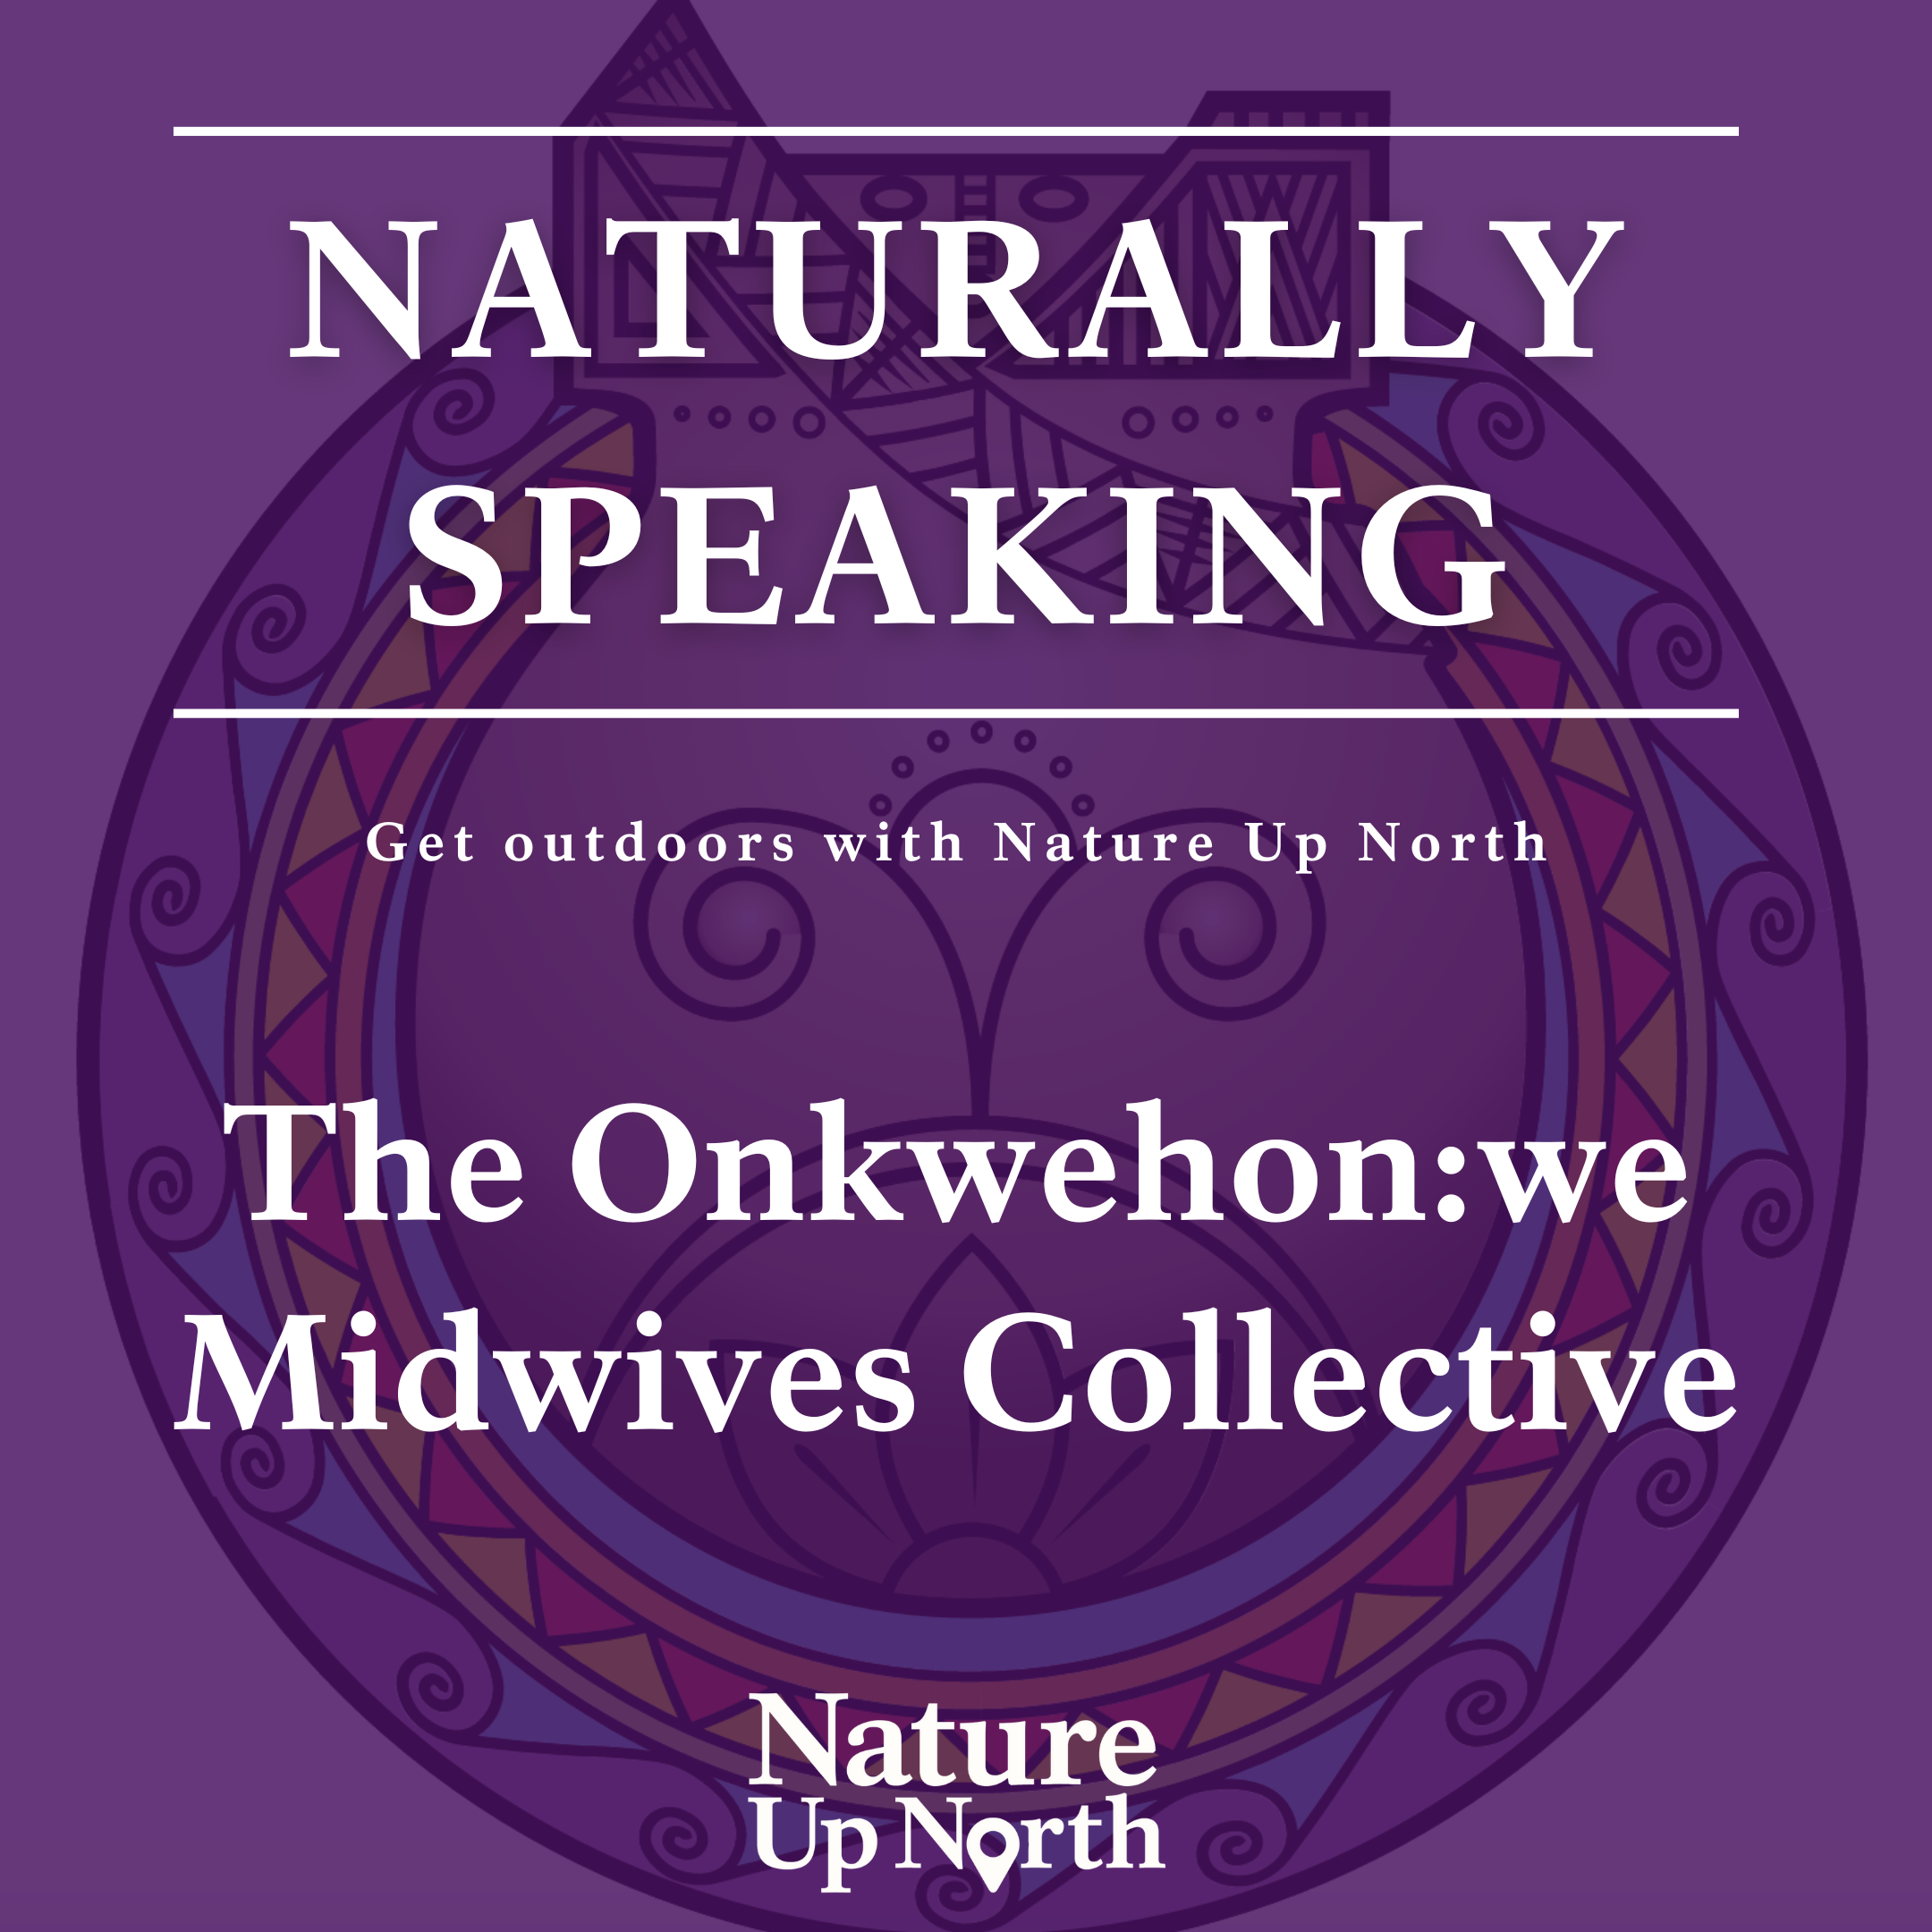 The episode title, the onkwehon:we midwives collective, overlays a purple background with the OMC logo on it. Also are the title of the podcast, Naturally Speaking, and the nature up north podcast slogan, get up and get outdoors with nature up north